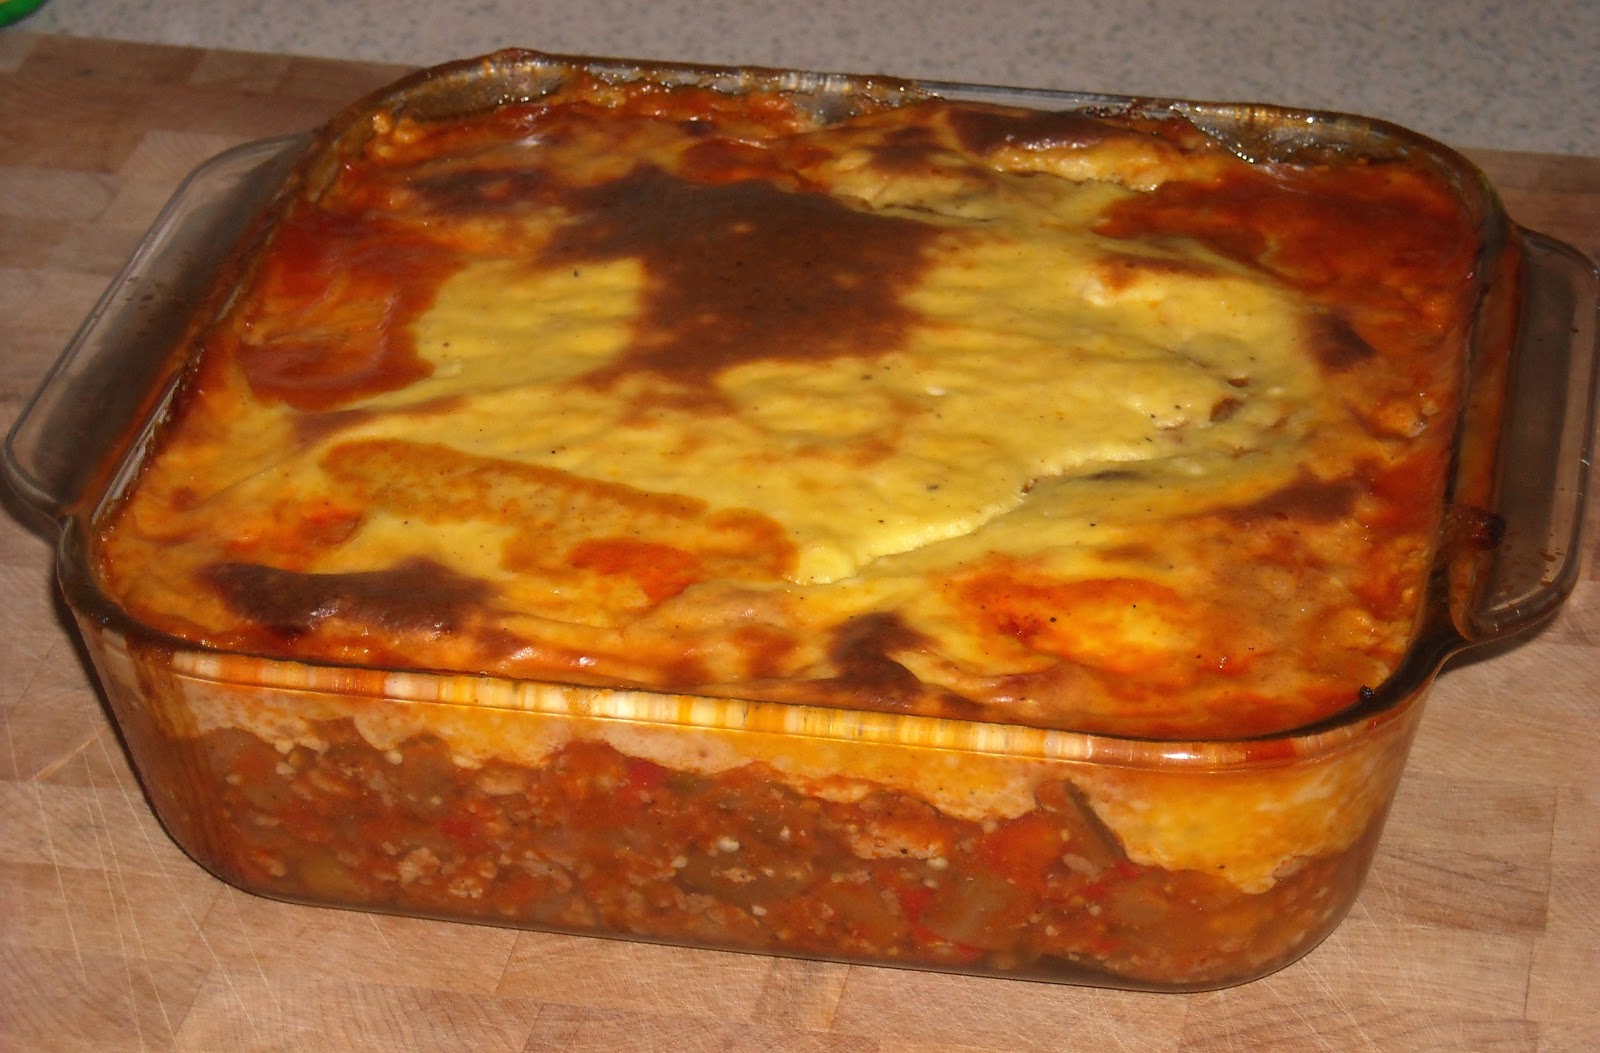 Leave a Happy Plate: Moussaka